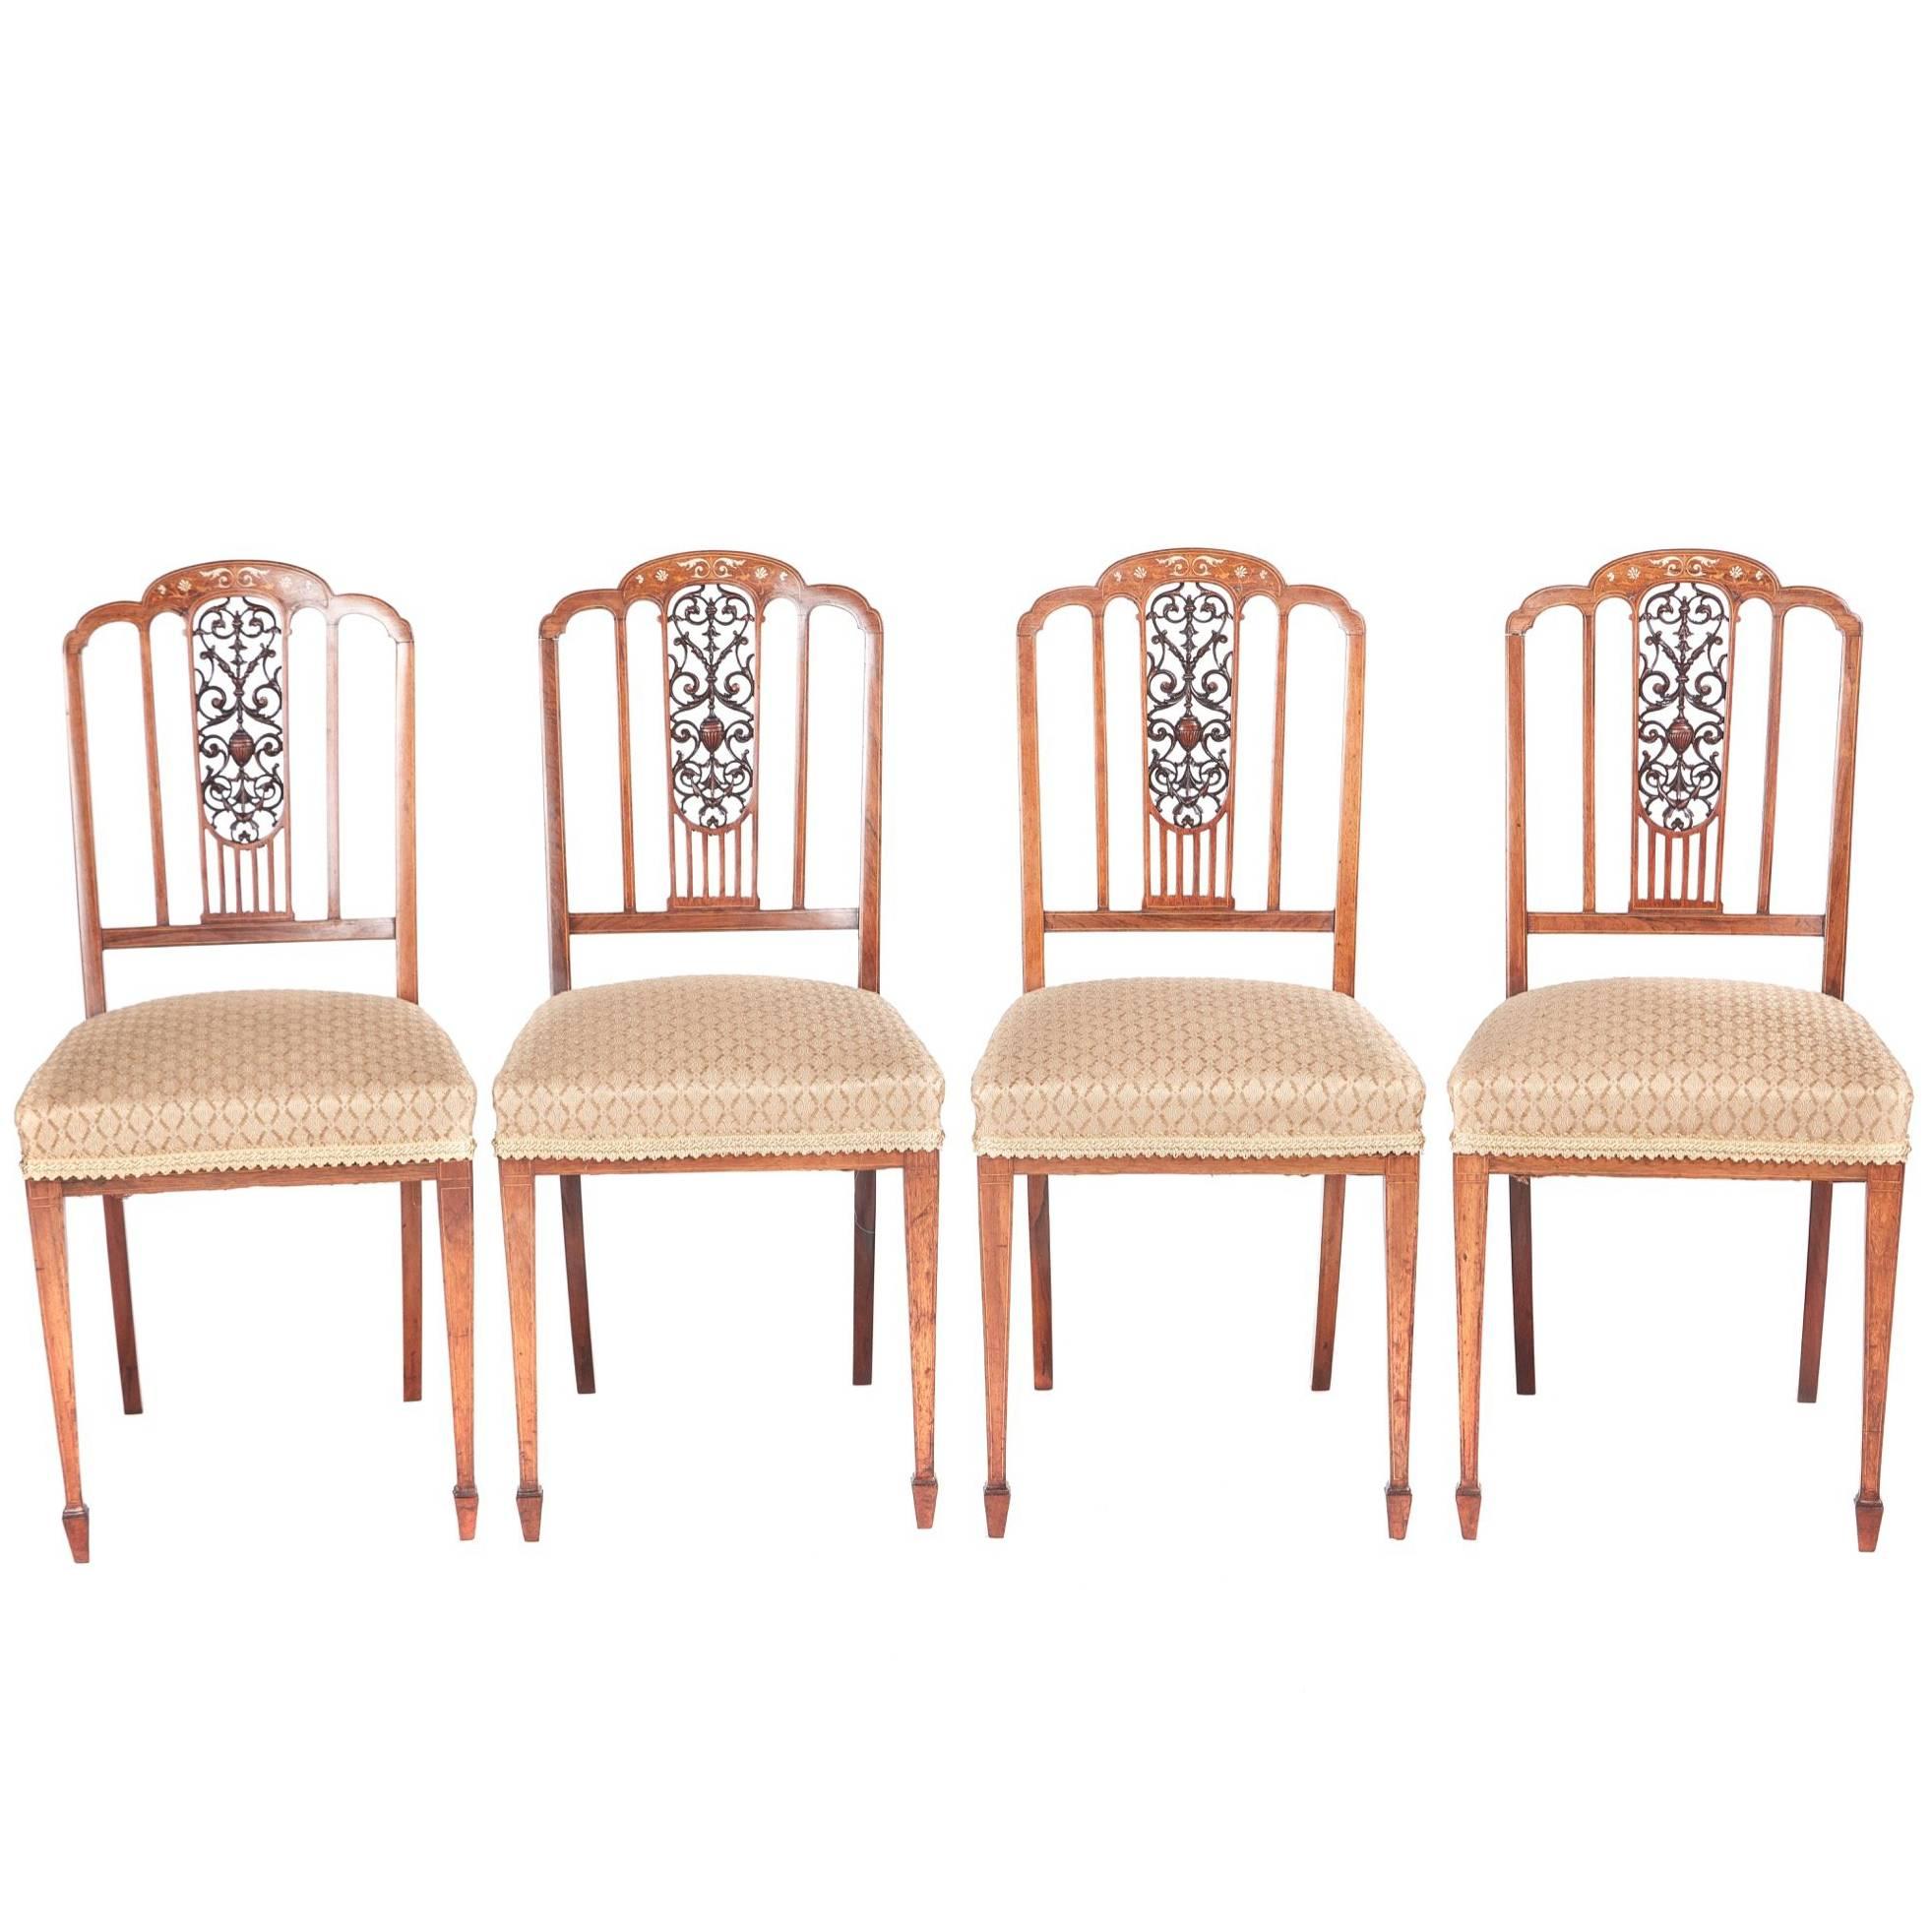 Outstanding Quality Set of Four Edwardian Inlaid Hardwood Dining Chairs For Sale